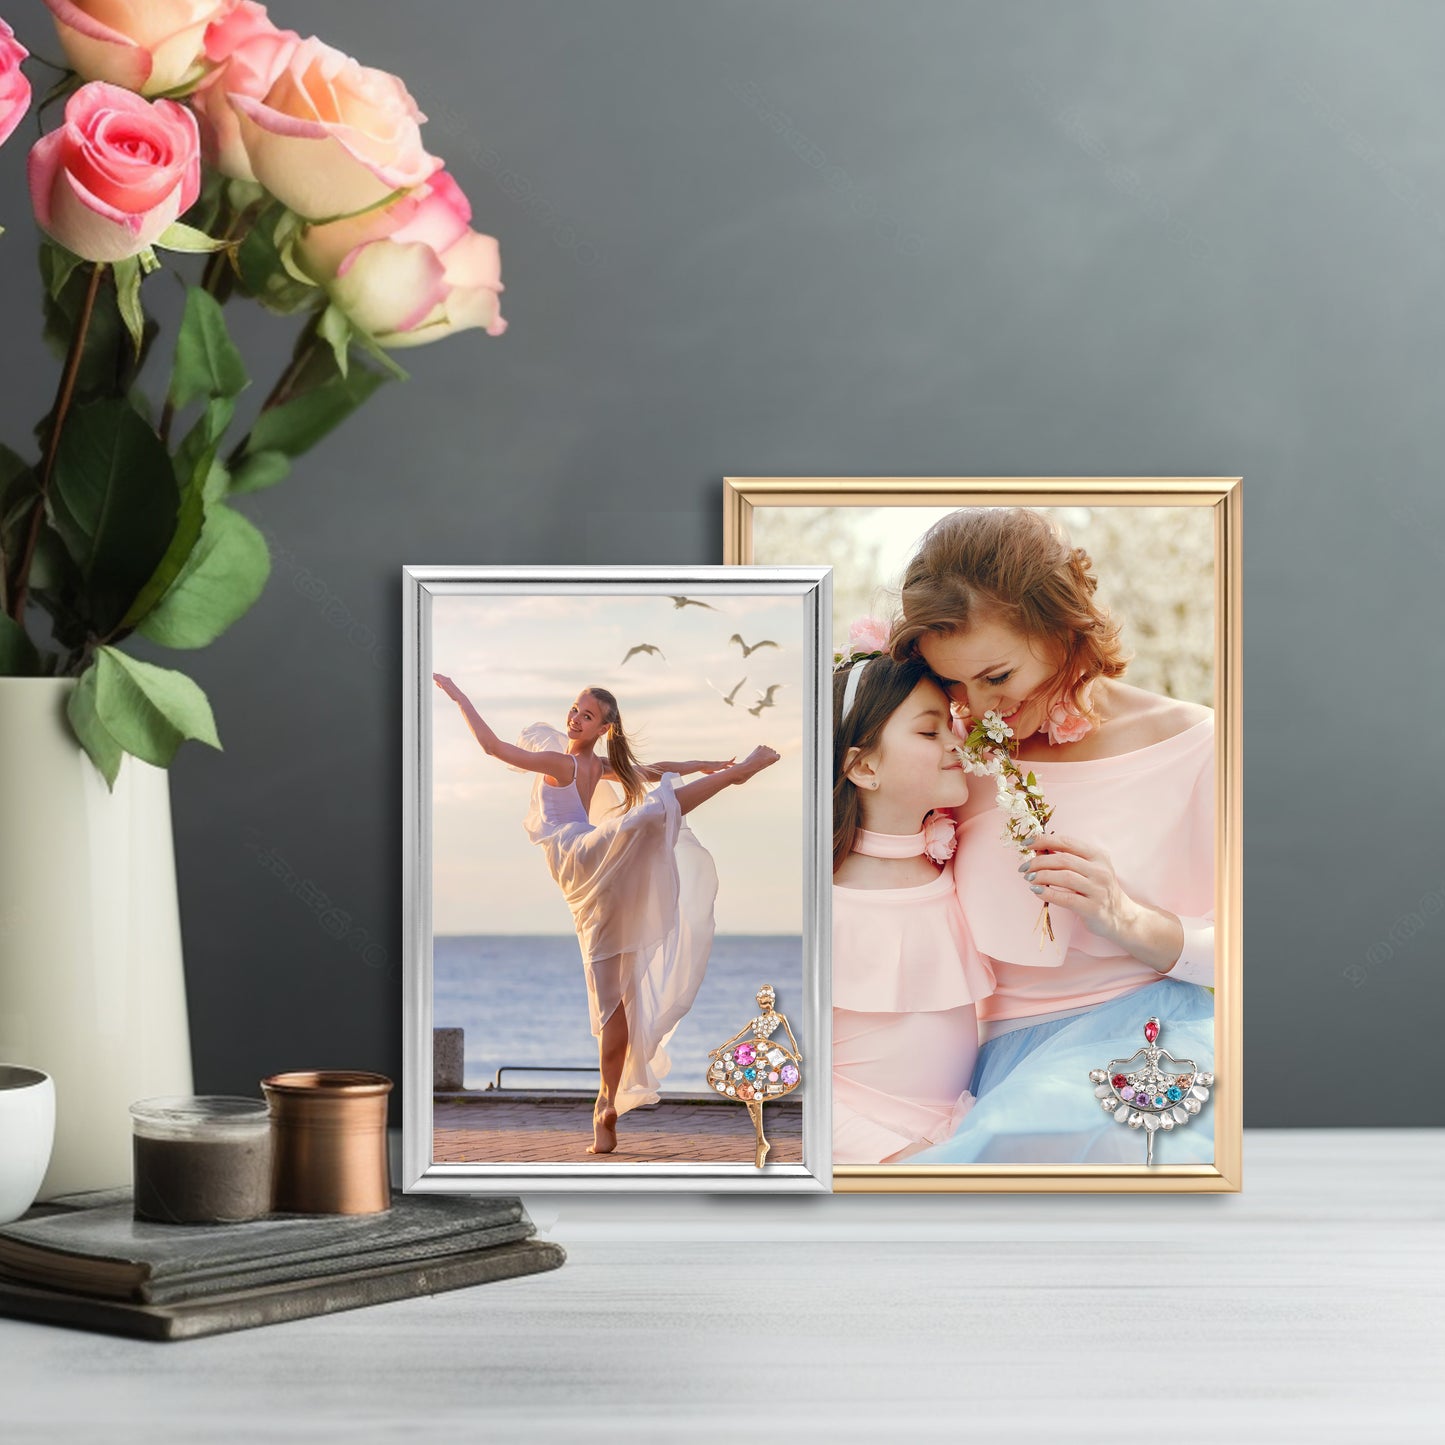 Women's Day Decorative Photo Frames Mother's Day Decorative Photo Frames Dotride 5x7 & 4x6 Picture Frames with Decorations 2 Pack, Metal Photo Frame with Detachable Dancing Girl Ornaments for Wall and Tabletop Display